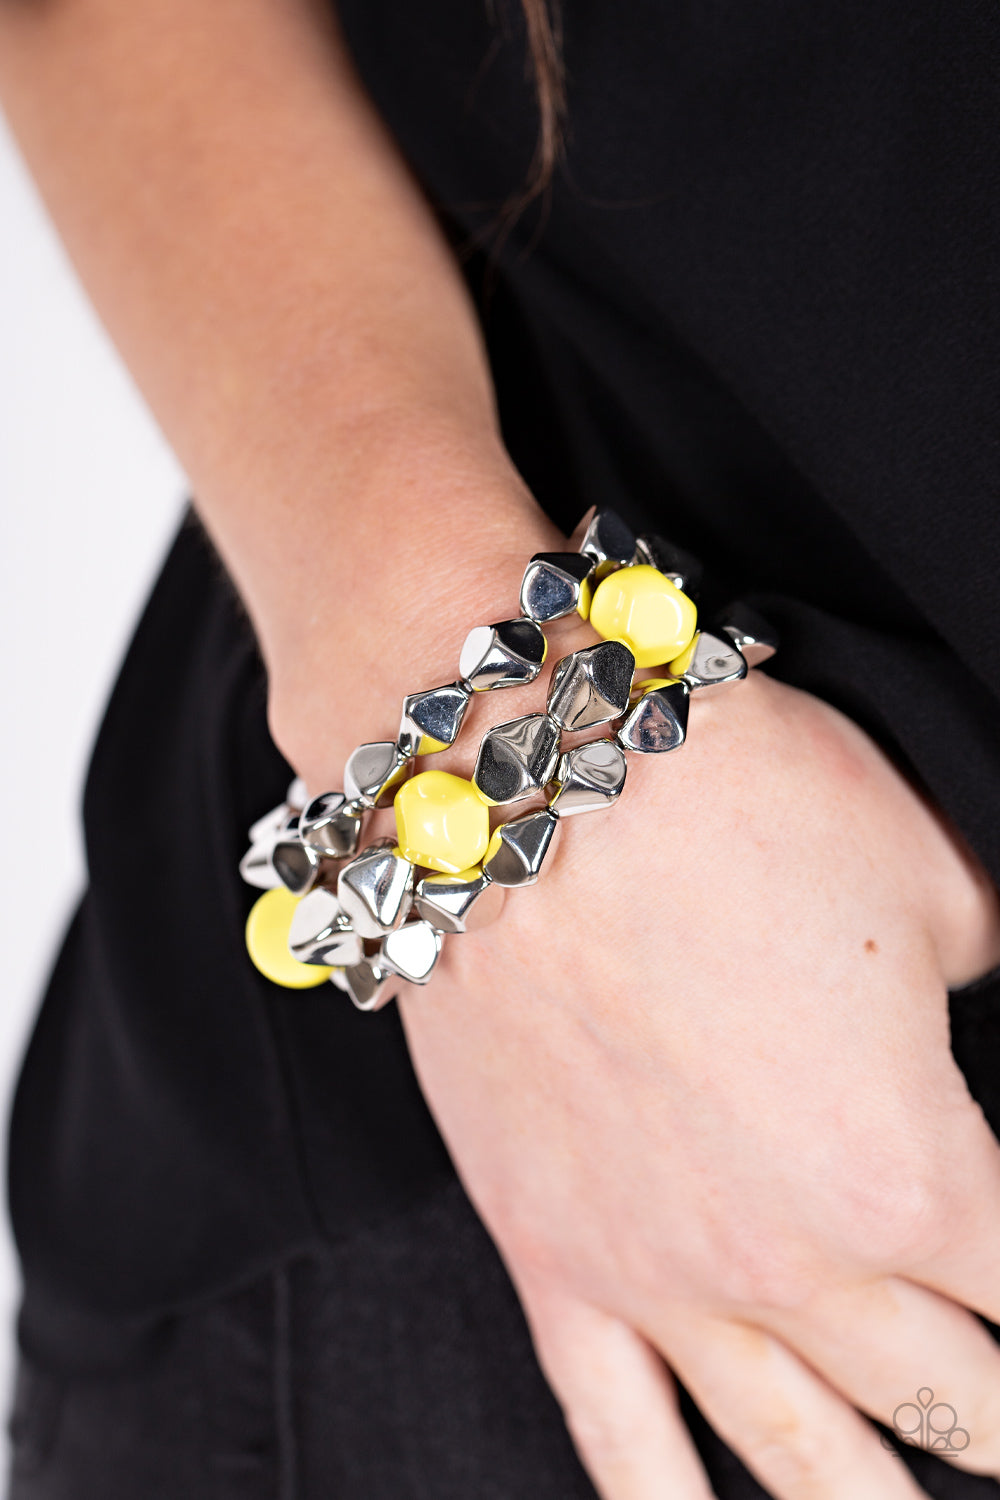 A Perfect TENACIOUS - Yellow Beaded Bracelets infused with pops of Illuminating accents, a faceted series of silver beads are threaded along stretchy bands around the wrist for a flashy fashion.  Sold as one set of three bracelets.